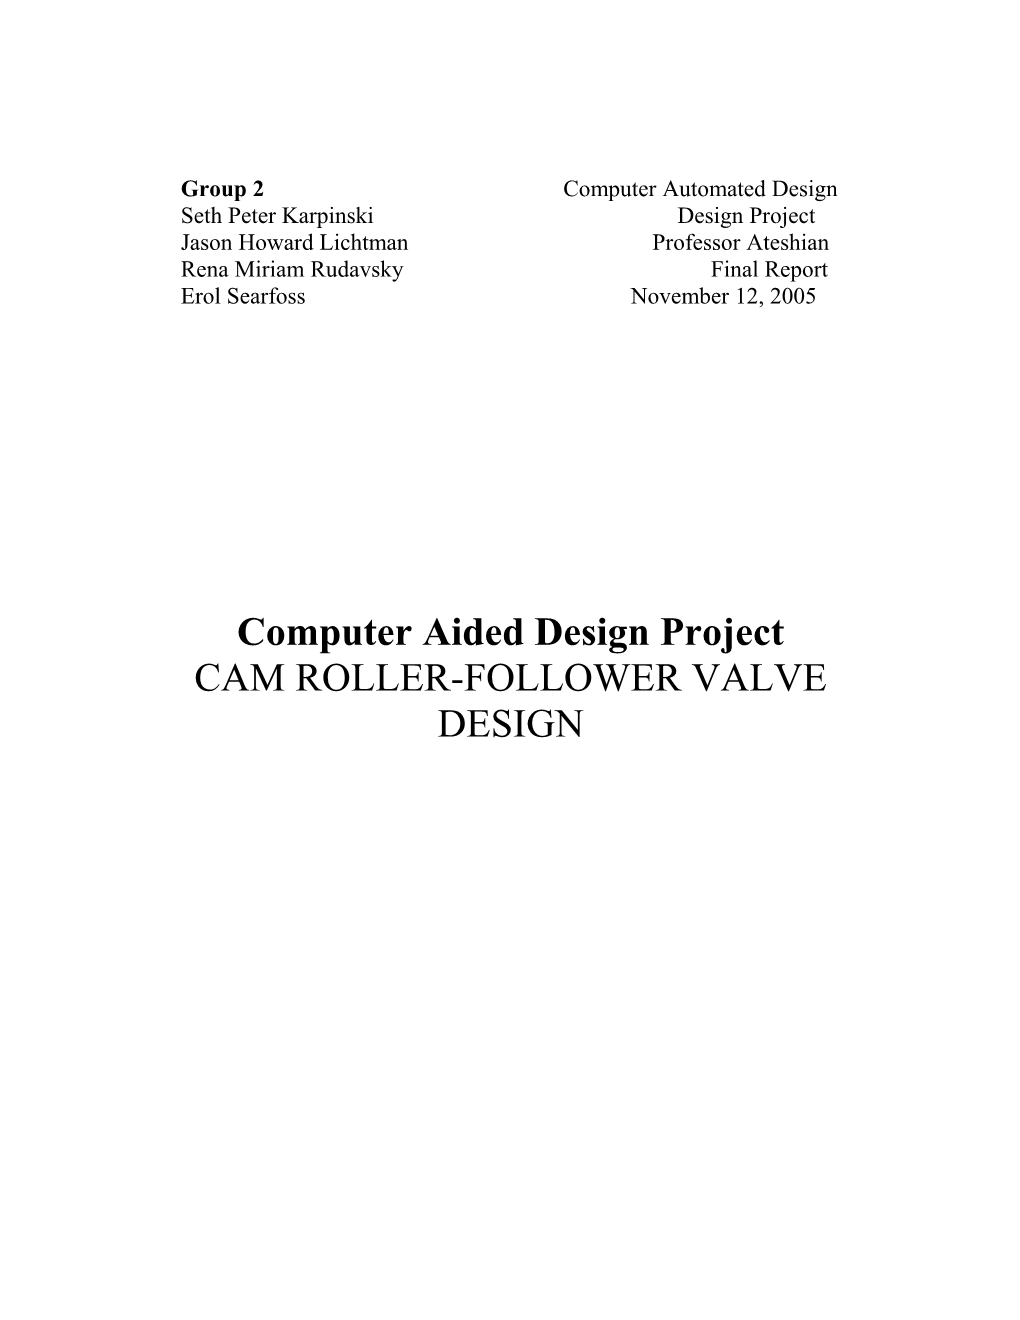 Computer Aided Design Project